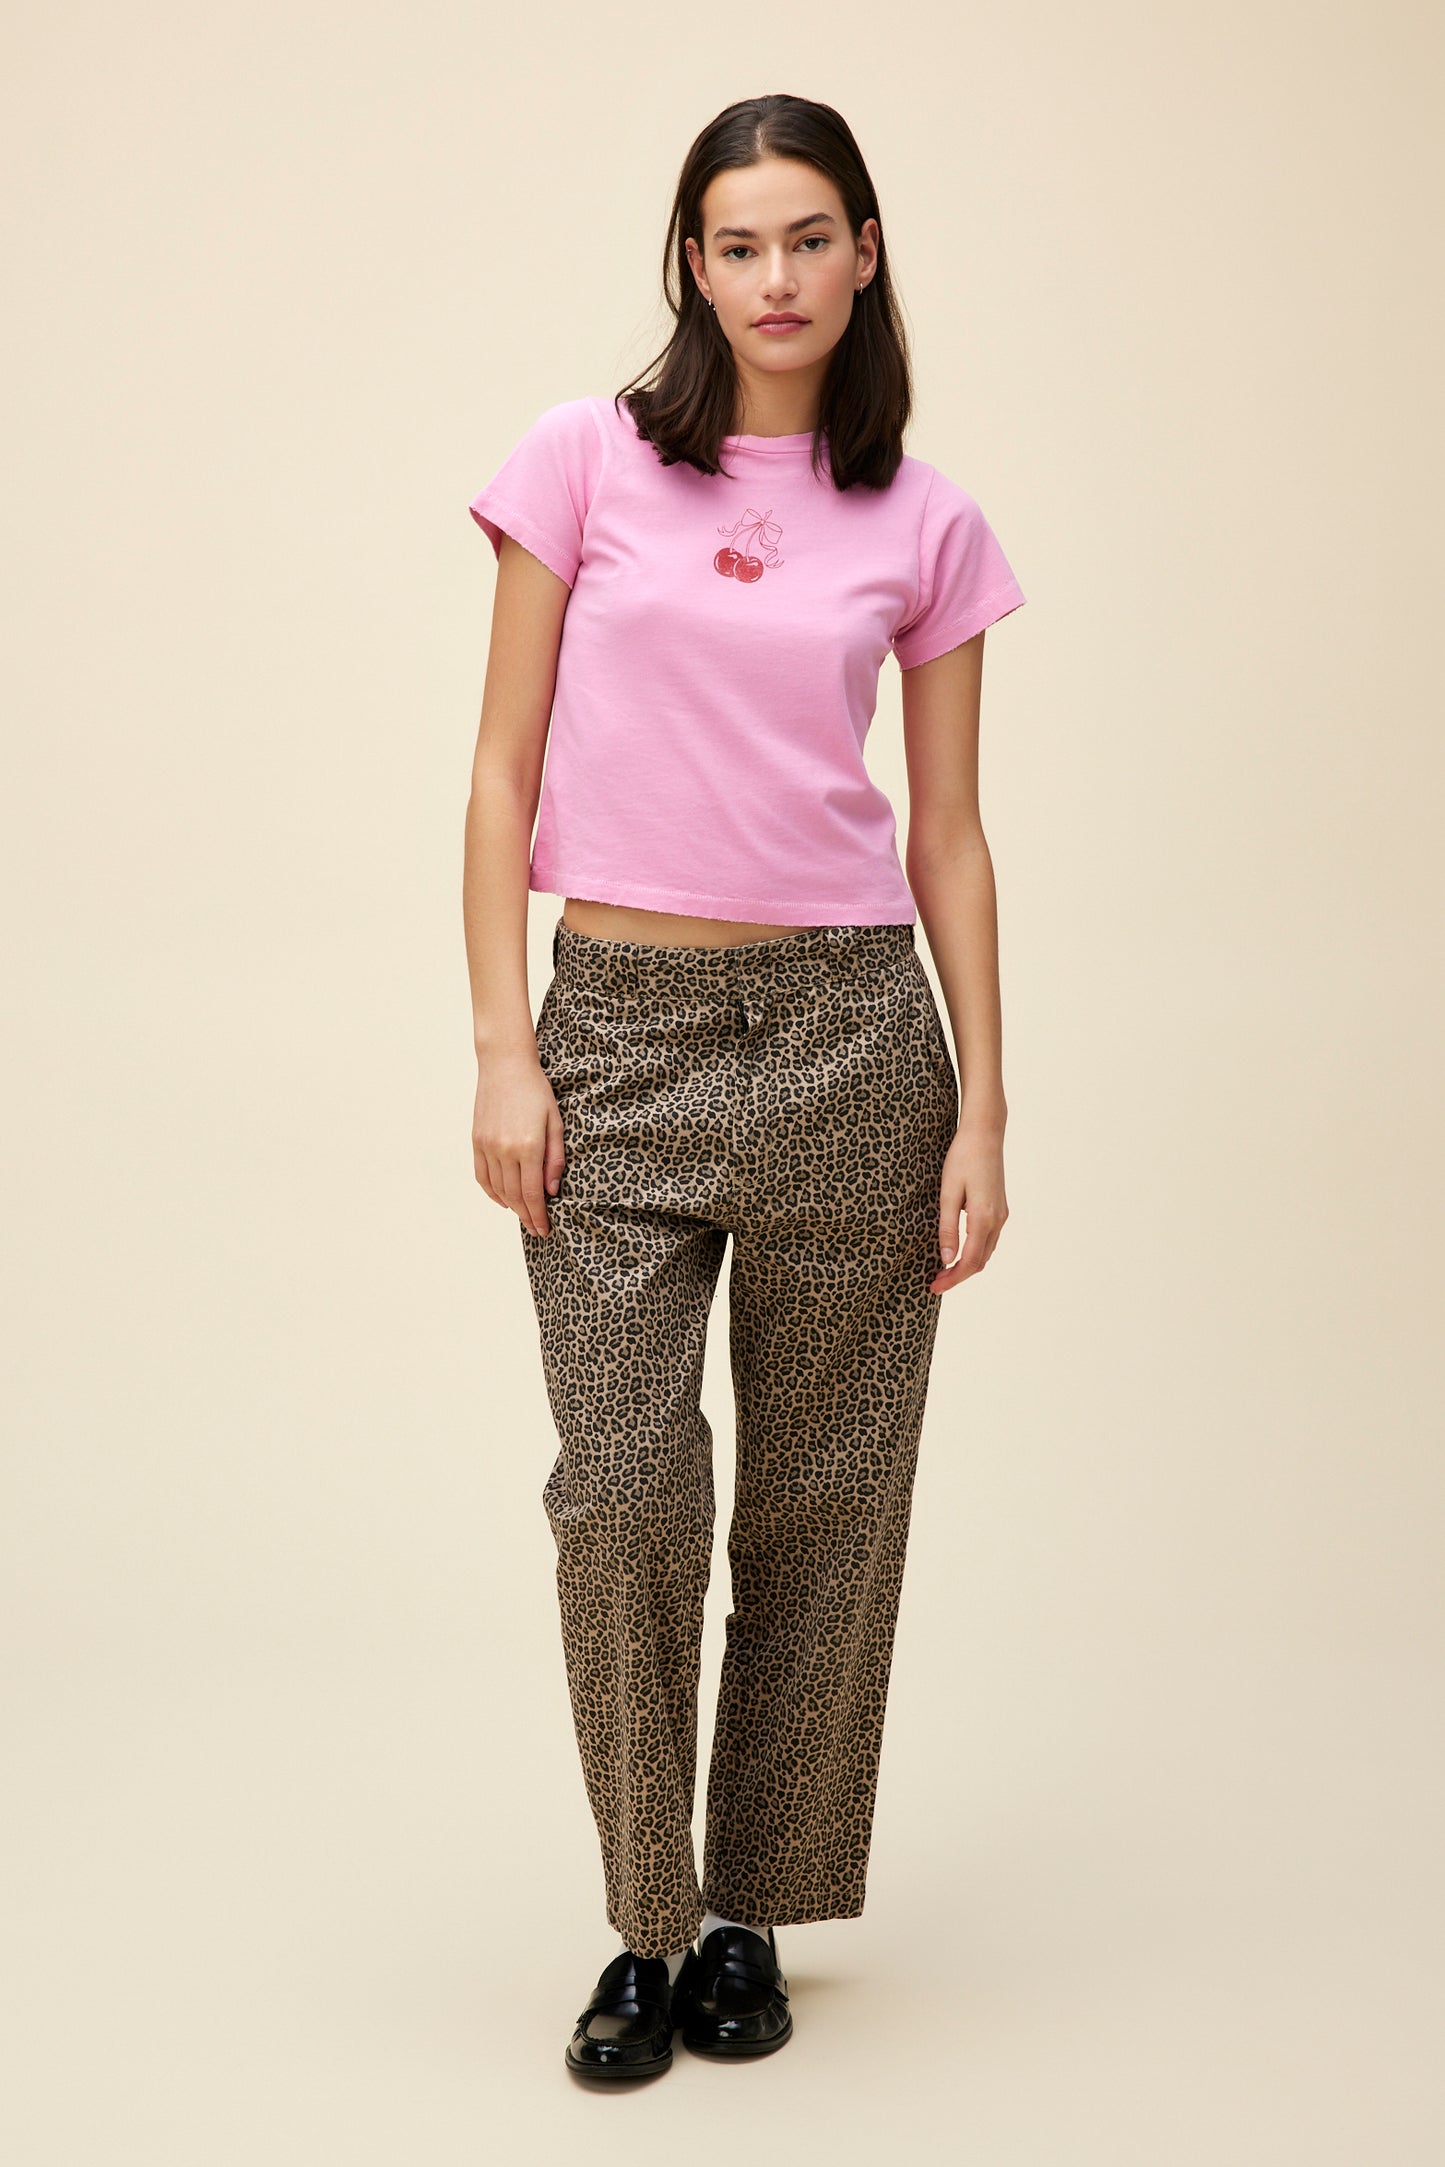 Model wearing a vintage-washed pink t-shirt with subtle grinding details and a cherry graphic on the front.